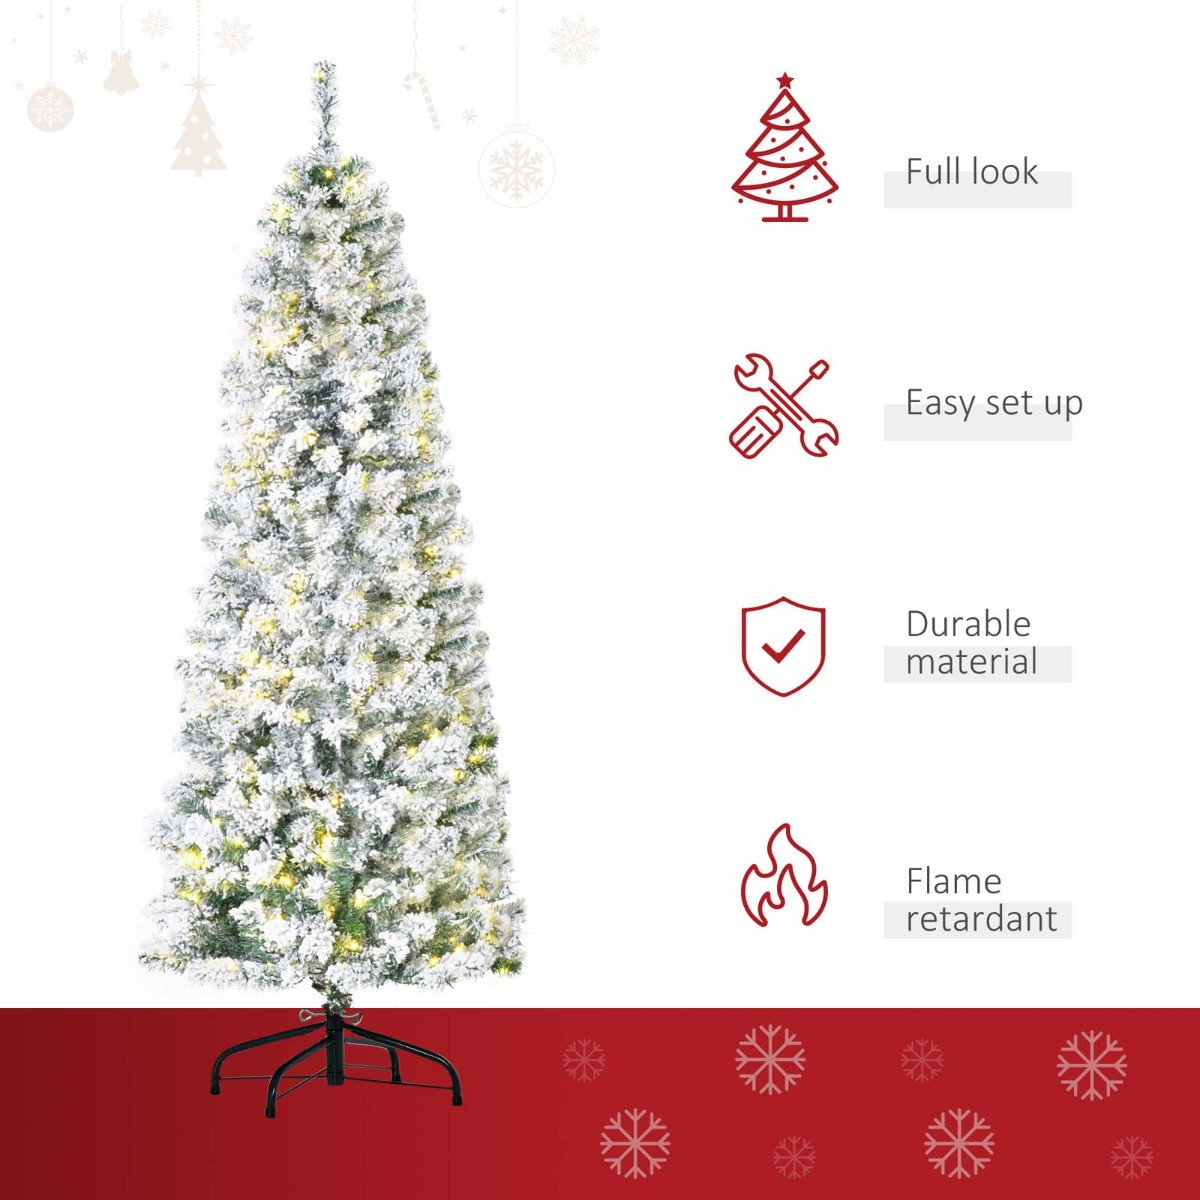 OHS Pre-Lit Artificial Snow Flocked Christmas Tree With Warm LED Lights, Green/White - 6ft>